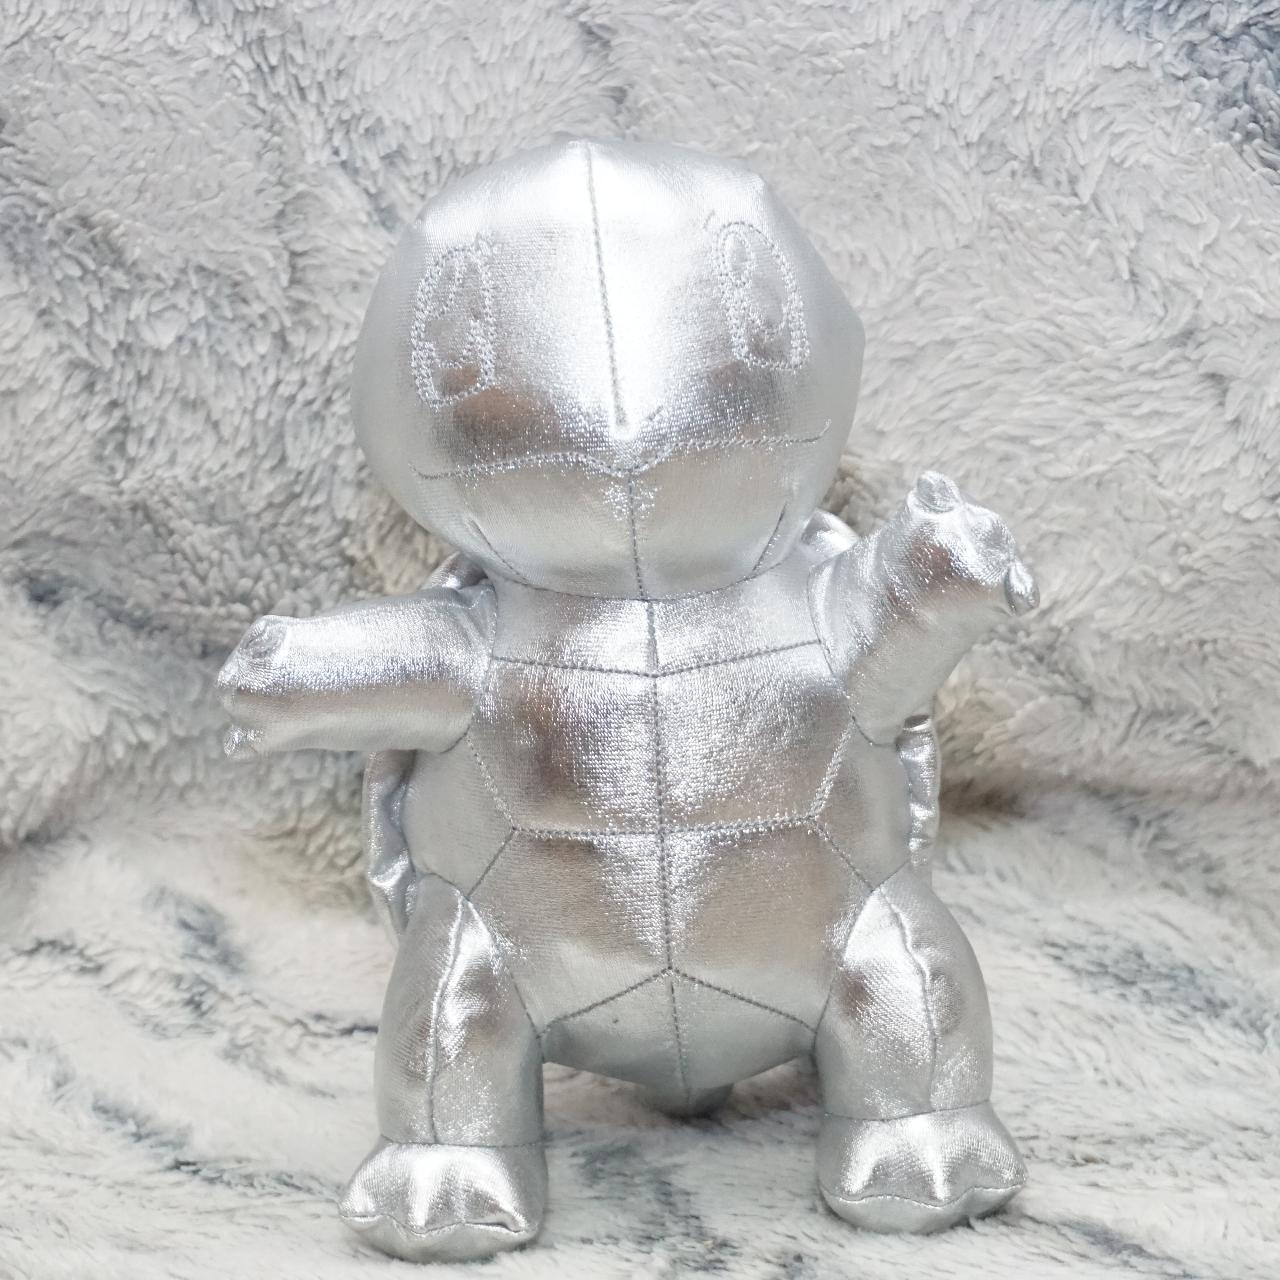 Product Image 1 - 25th Anniversary Silver Squirtle Plush
8"